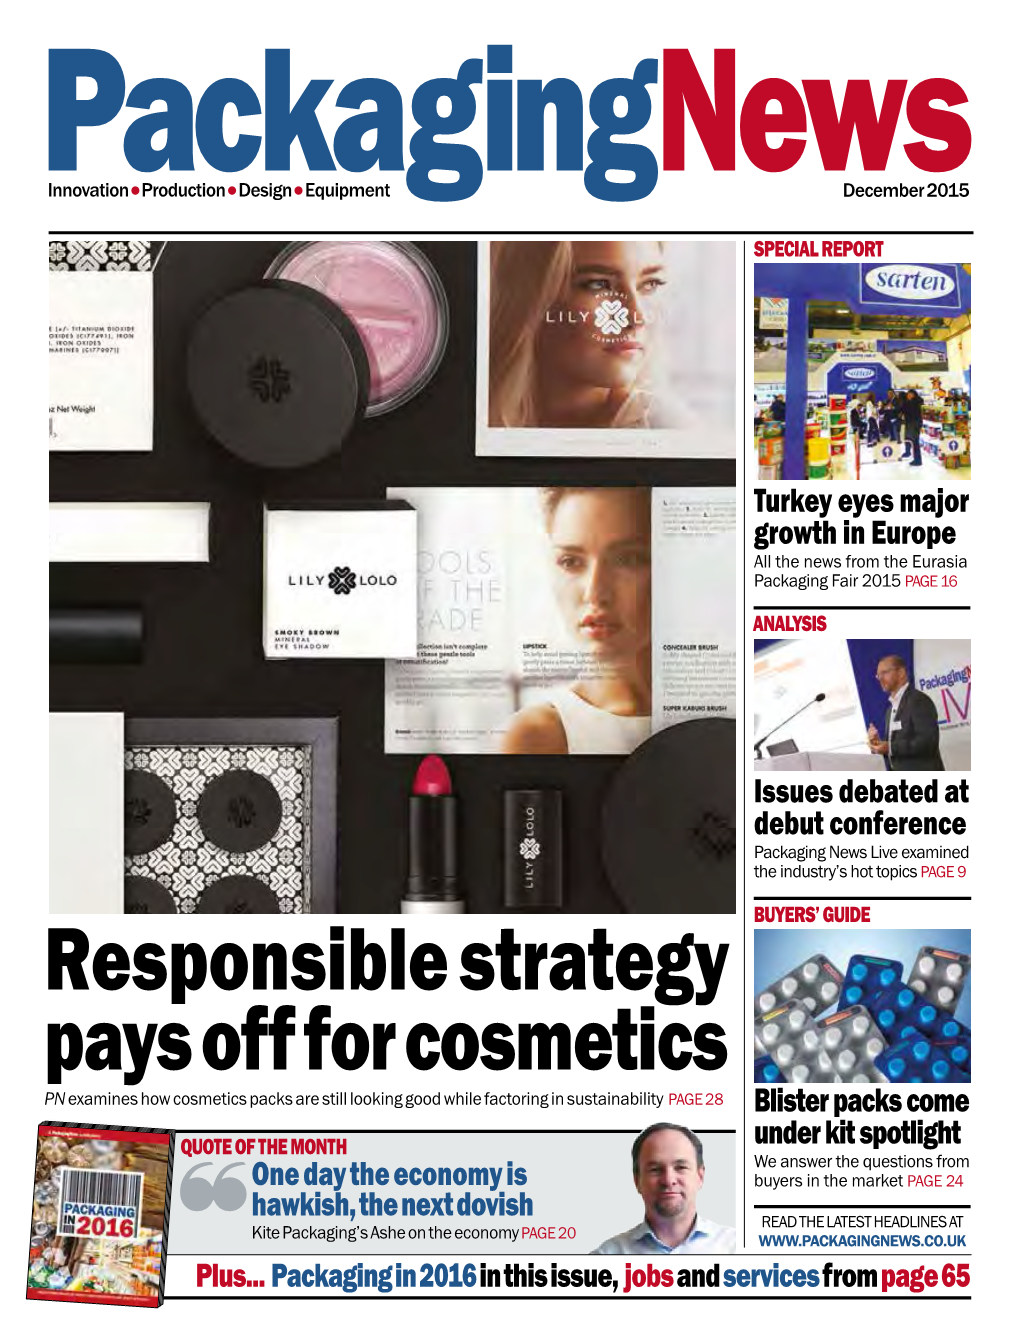 Responsible Strategy Pays Off for Cosmetics